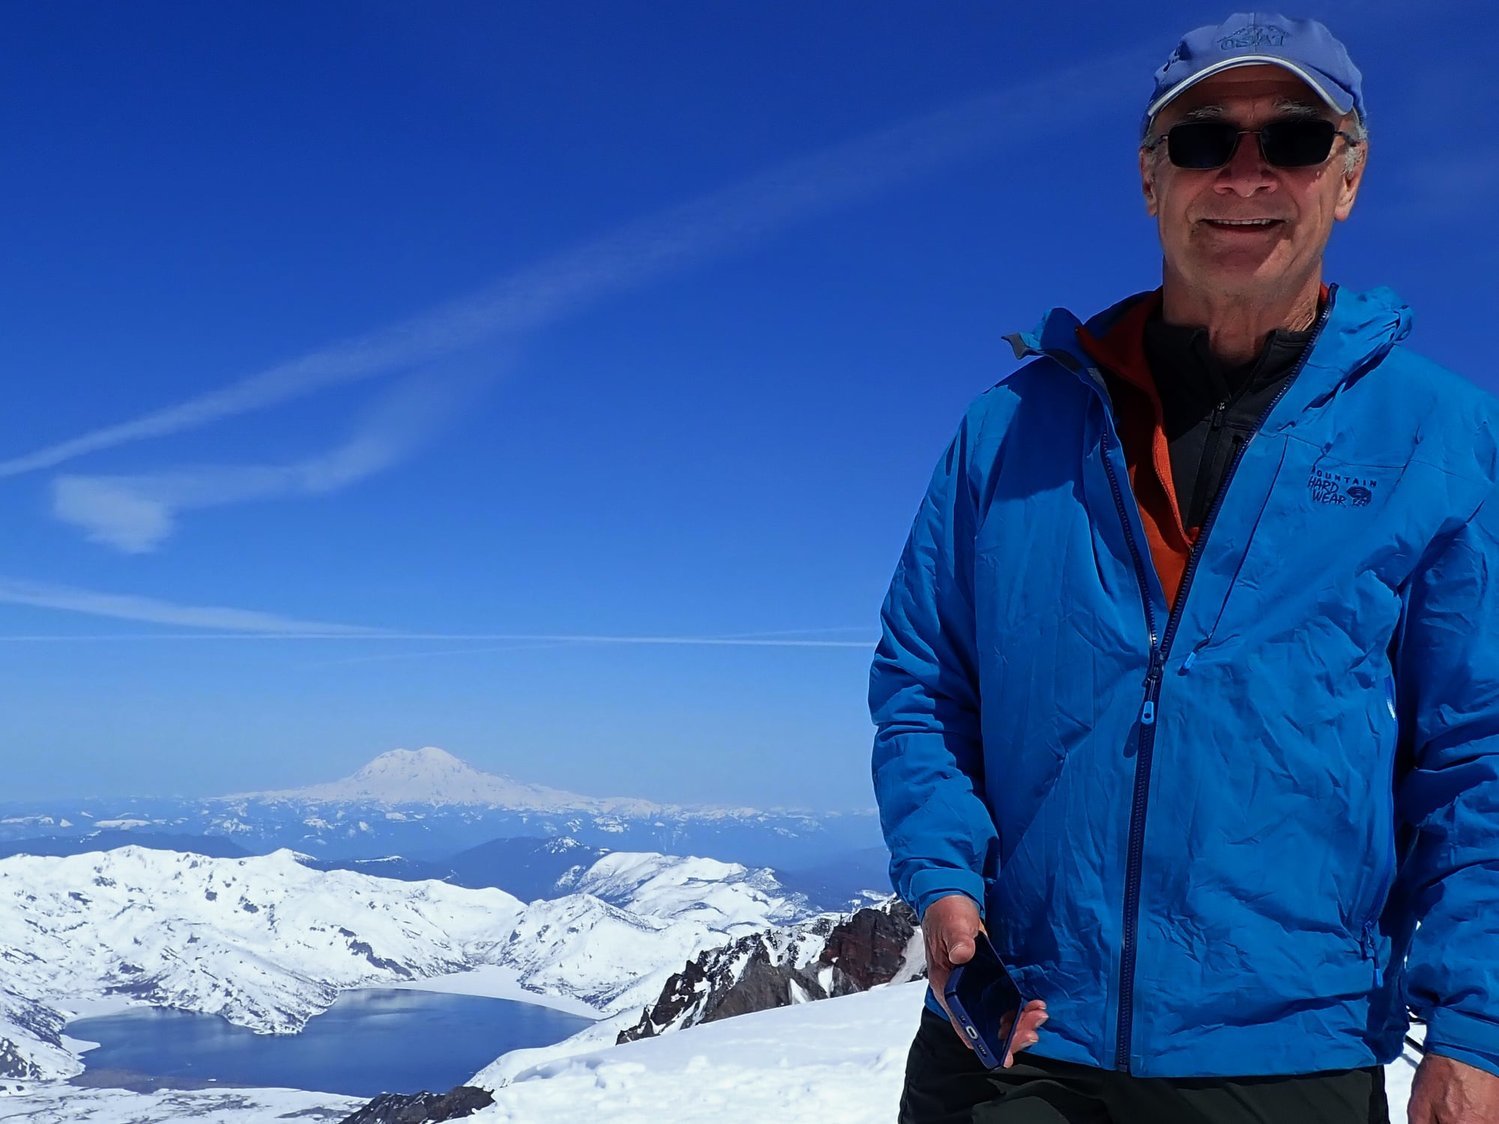 Neal Kirby poses for a photograph after reaching the summit of Mount St. Helens on March 31. In addition to being a longtime educator and principal in Lewis County, Kirby is the chairman of the Olympia Branch of Mountaineers.